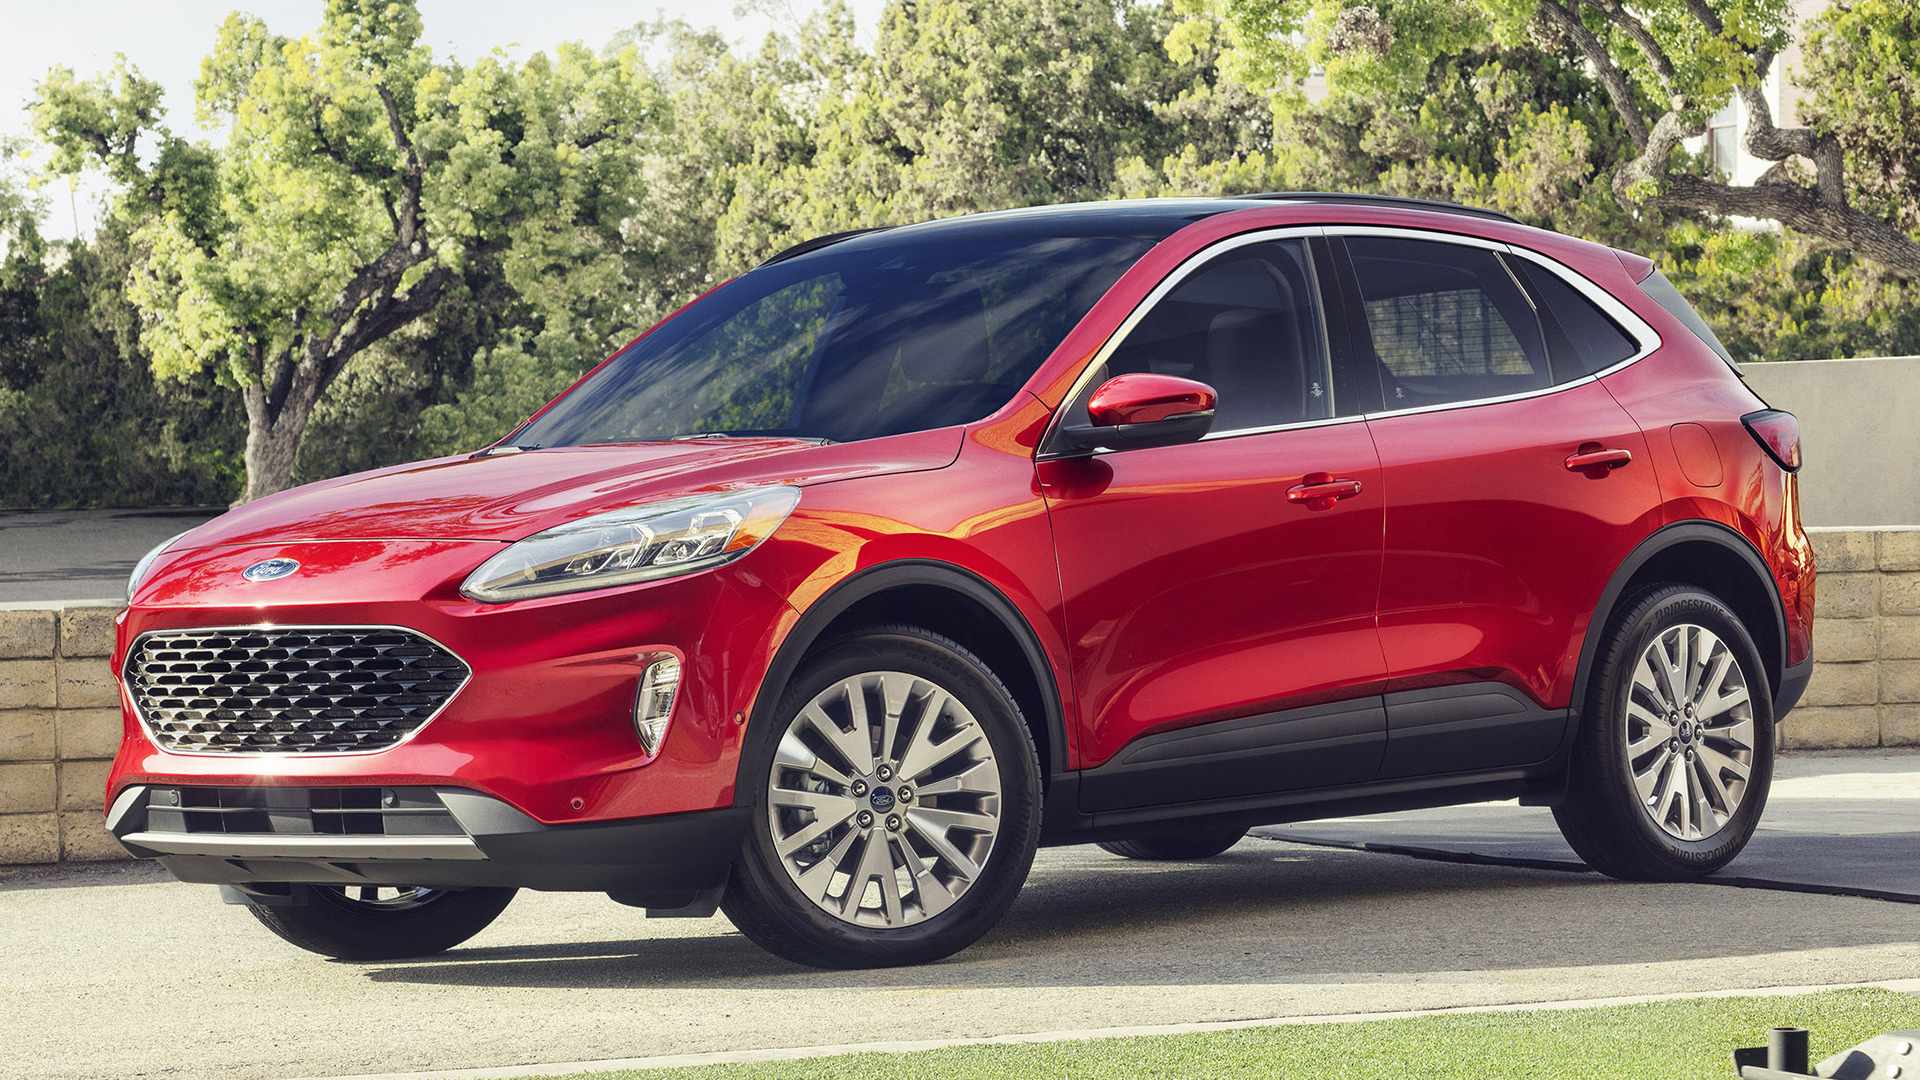 2020 Ford Escape Hybrid - Wallpapers and HD Images | Car Pixel